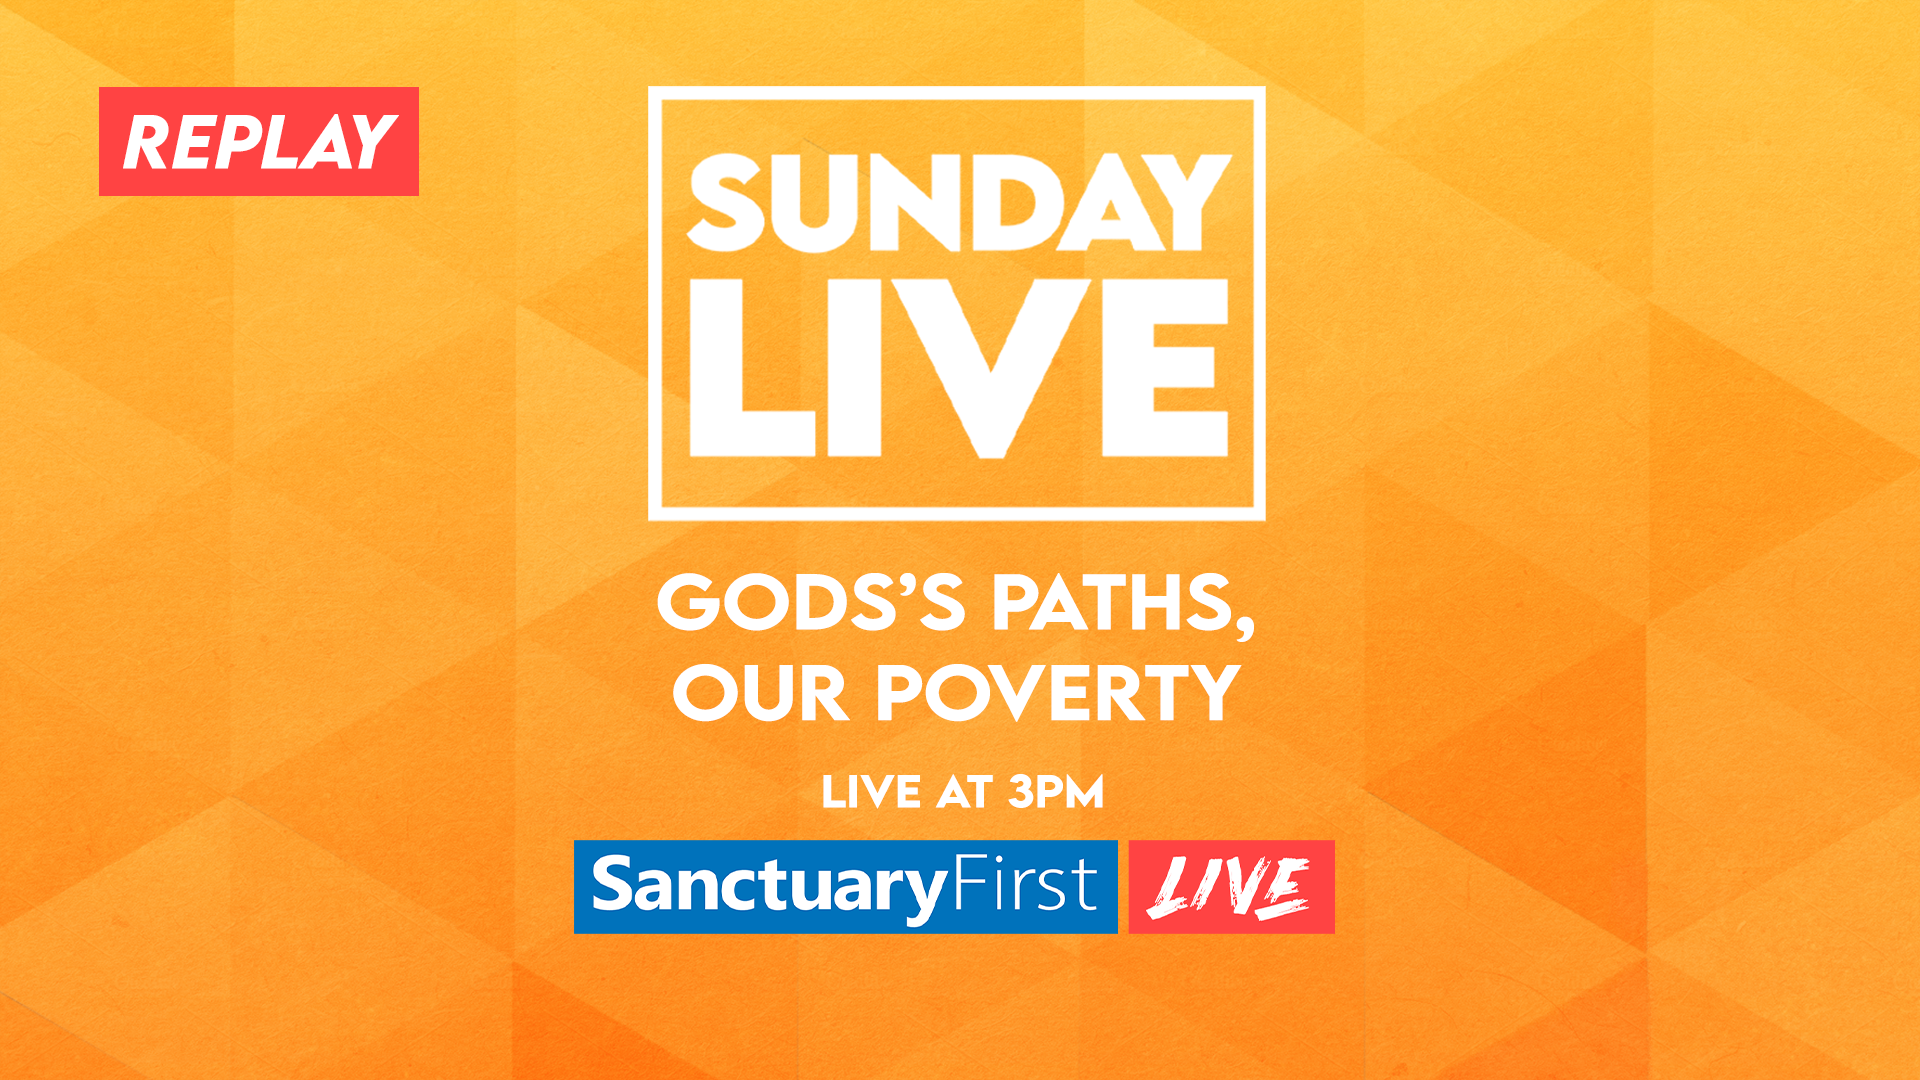 Sunday Live - God’s Paths, Our Poverty